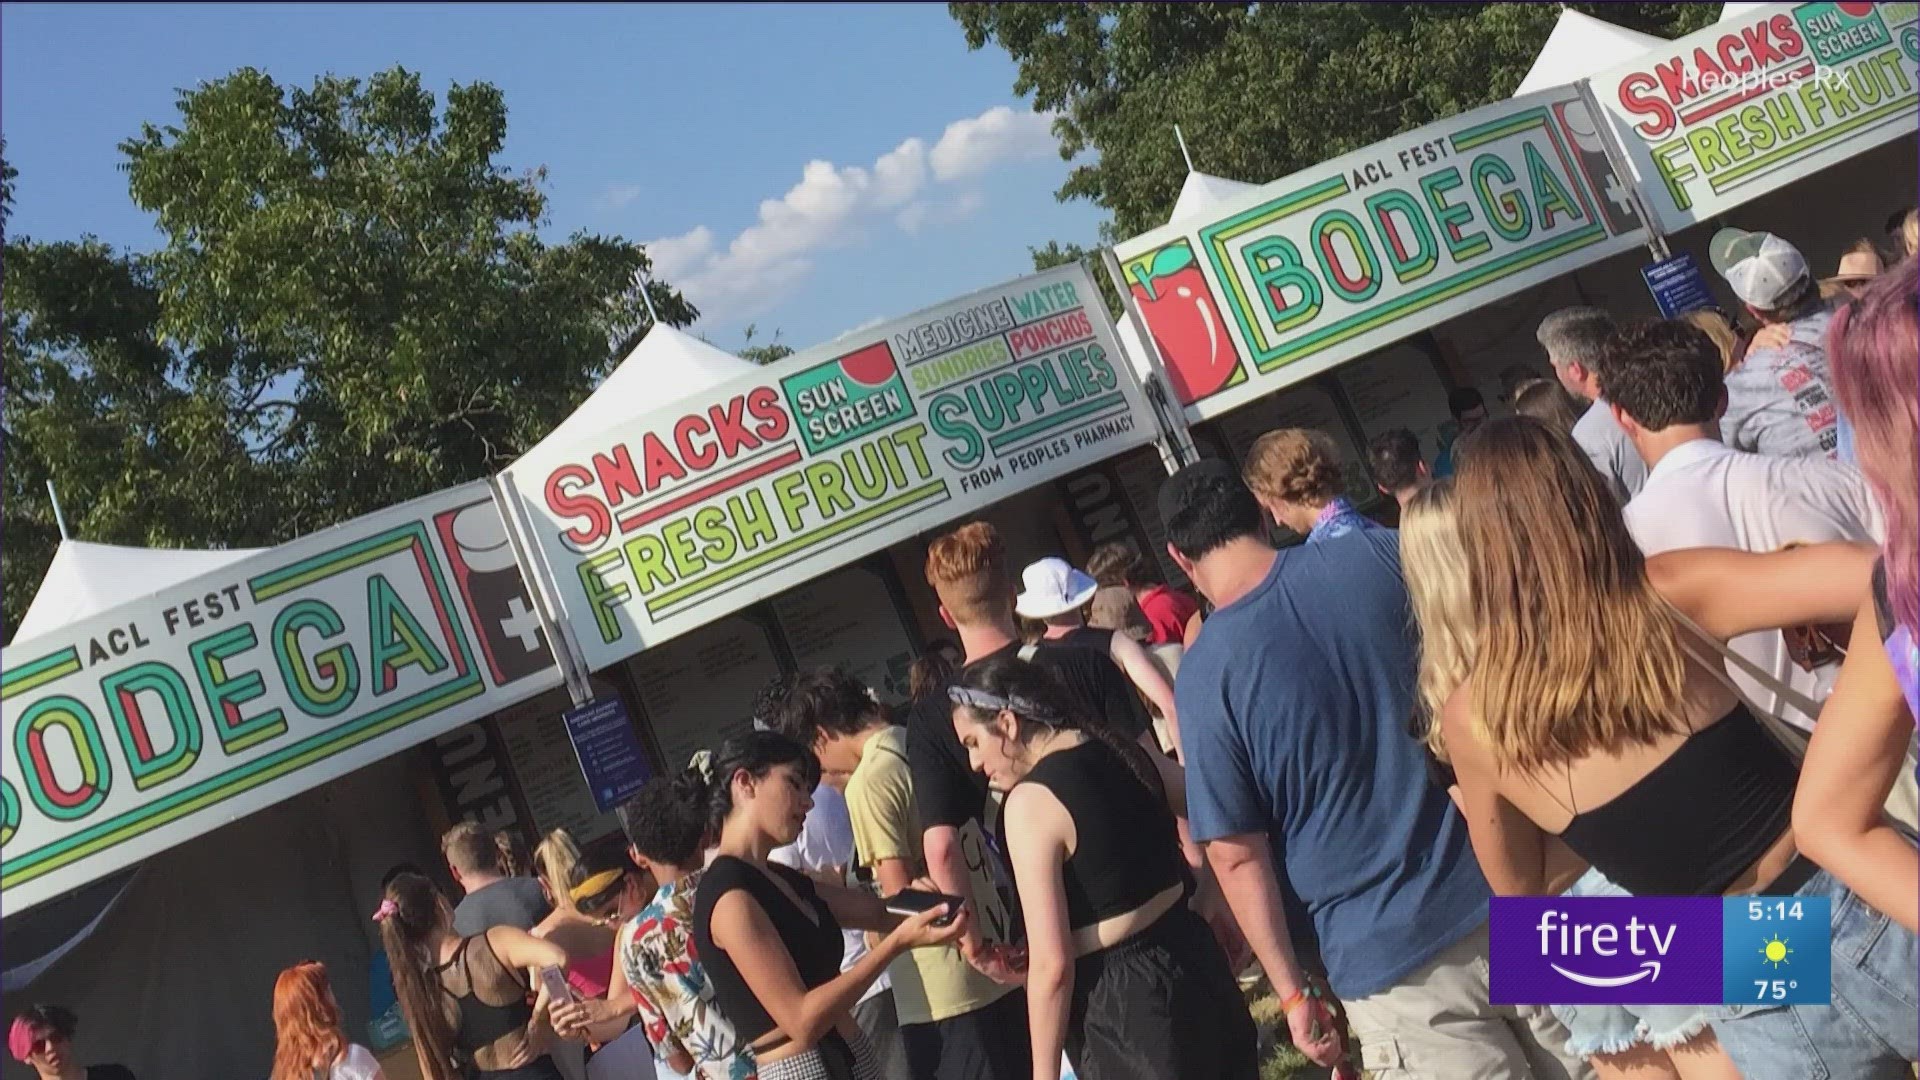 Local Austin pharmacy, Peoples Rx will be hosting a Bodega inside festival grounds stocked with health products.